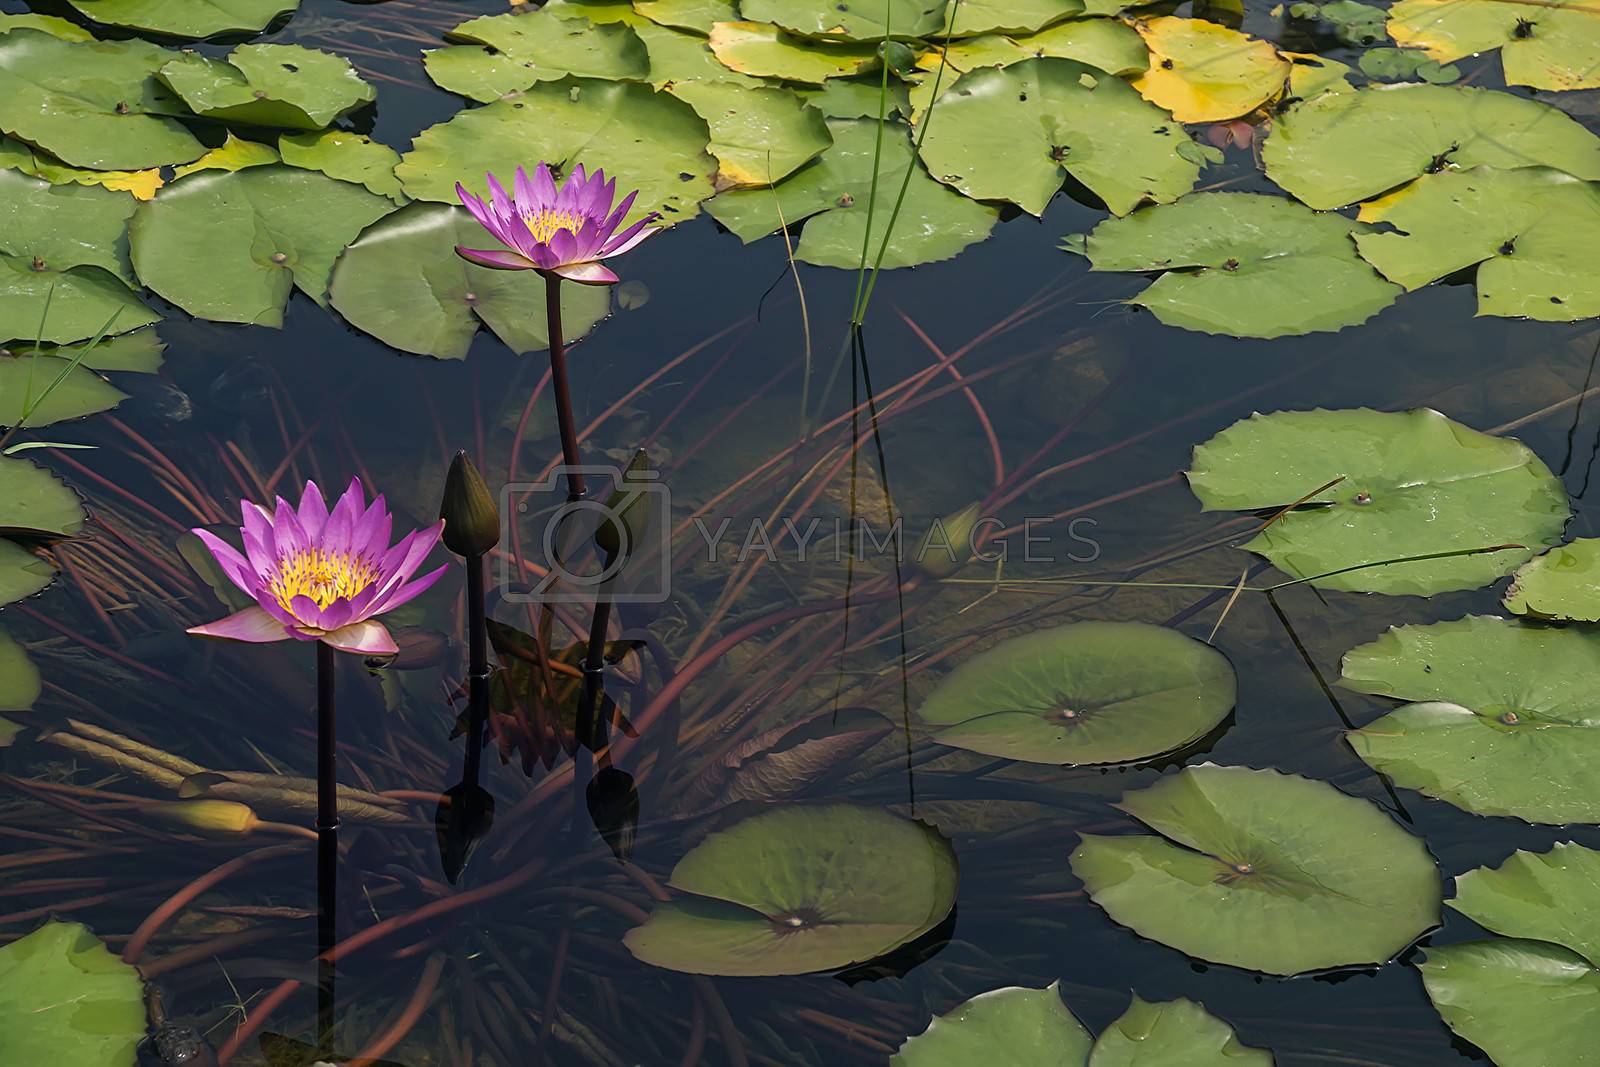 Royalty free image of Water lily by xfdly5